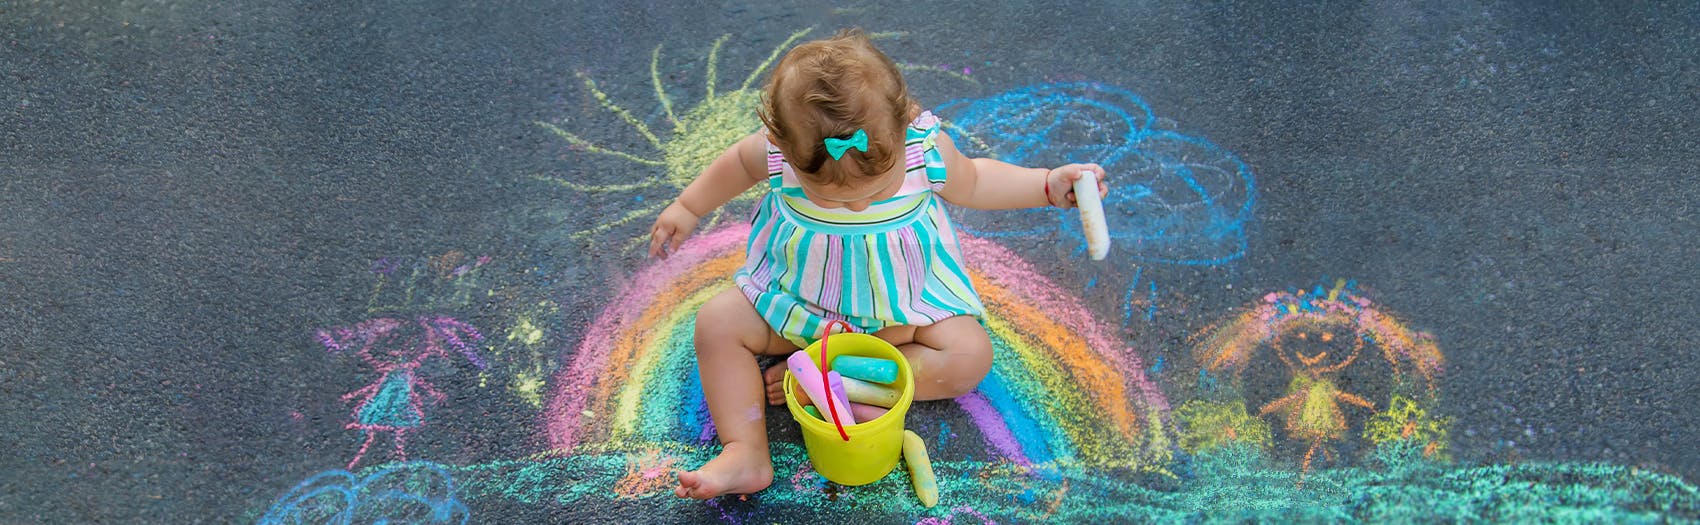 A child drawing with chalk